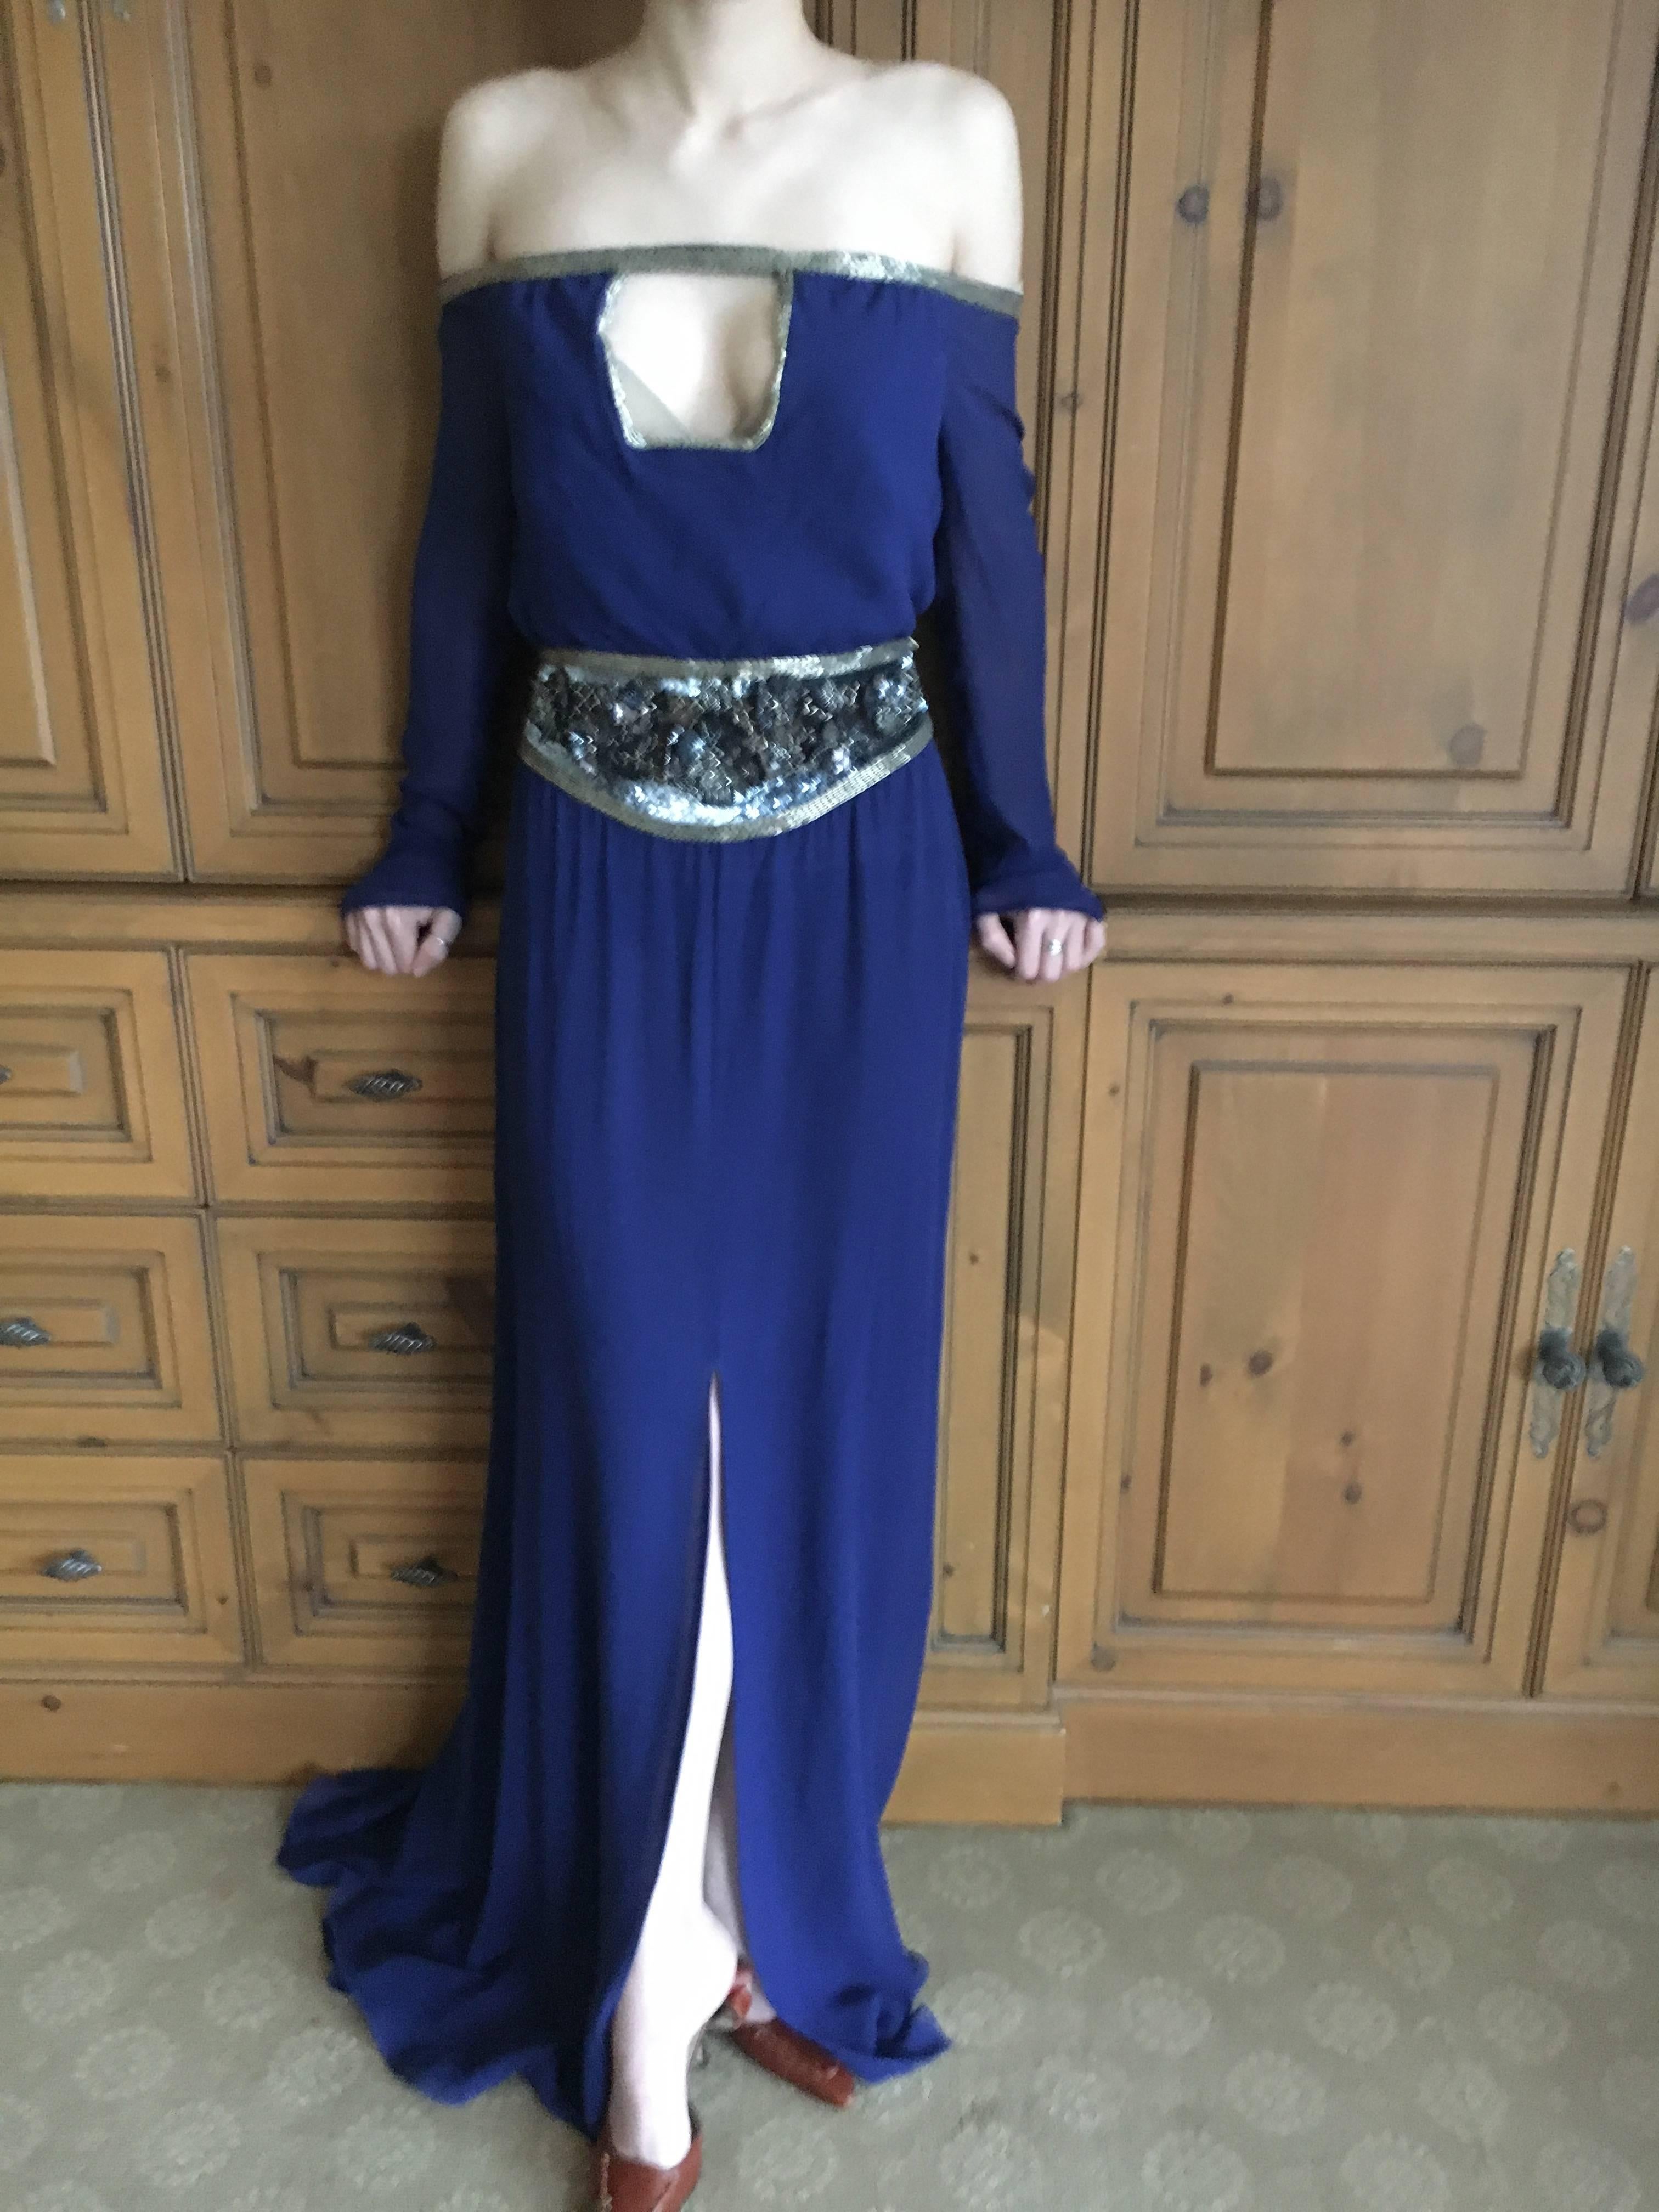 Valentino Silk Chiffon Off the Shoulder Beaded Evening Dress with Keyhole Bust.
This is so much prettier than the photos show.
Bust 38"
Waist 29"
Hips 45"
Length 52"
There are some minor snags, nothing obvious